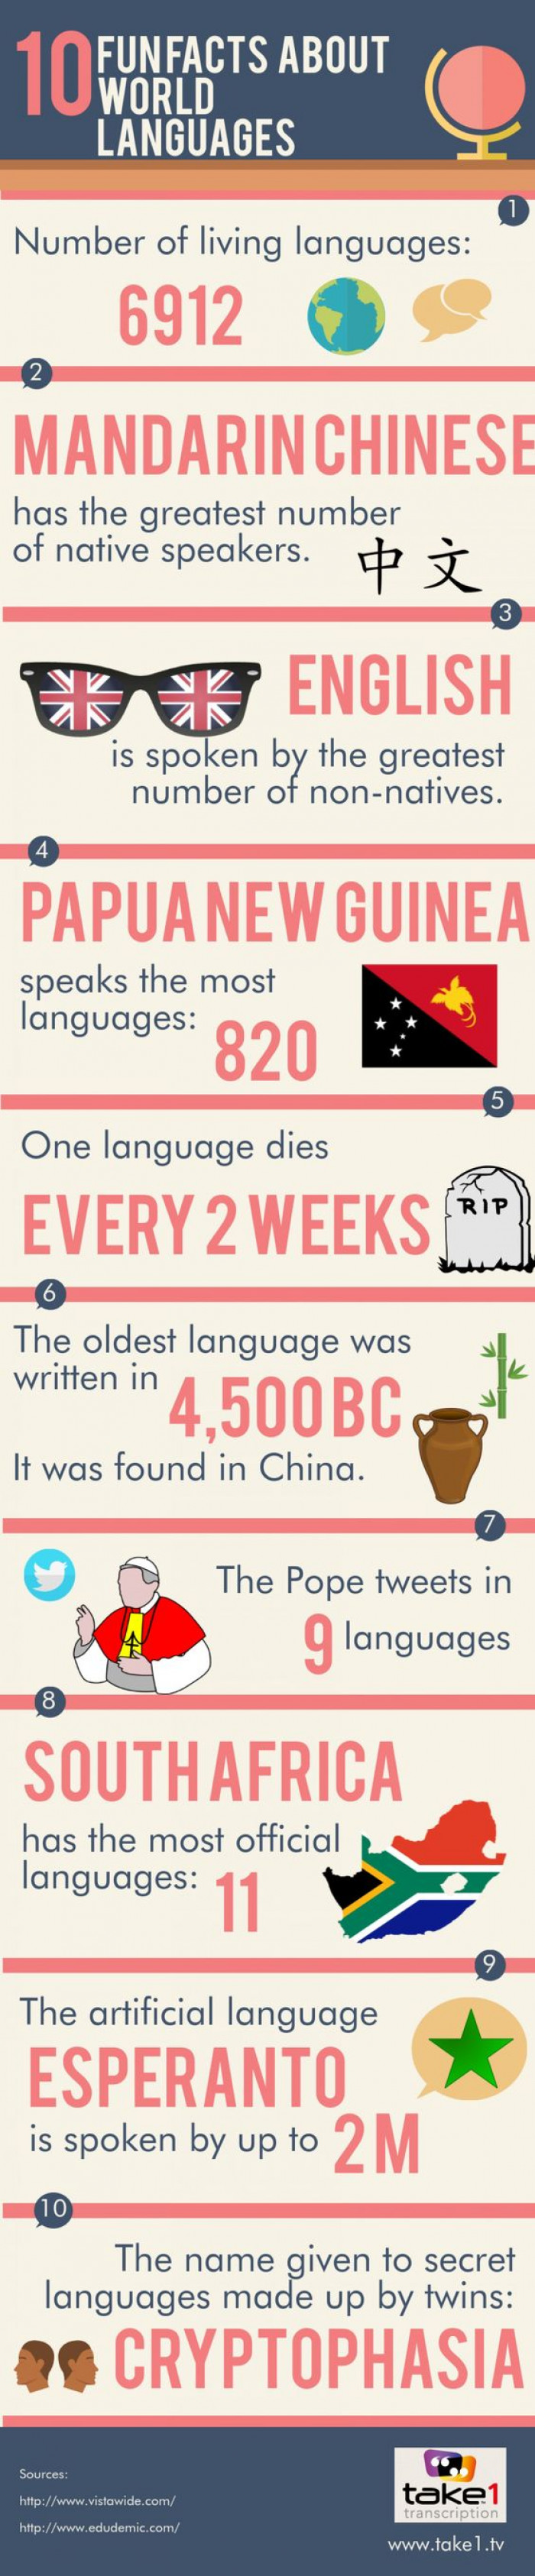 10 Facts About World Languages That Will Make You Want To Learn A New One